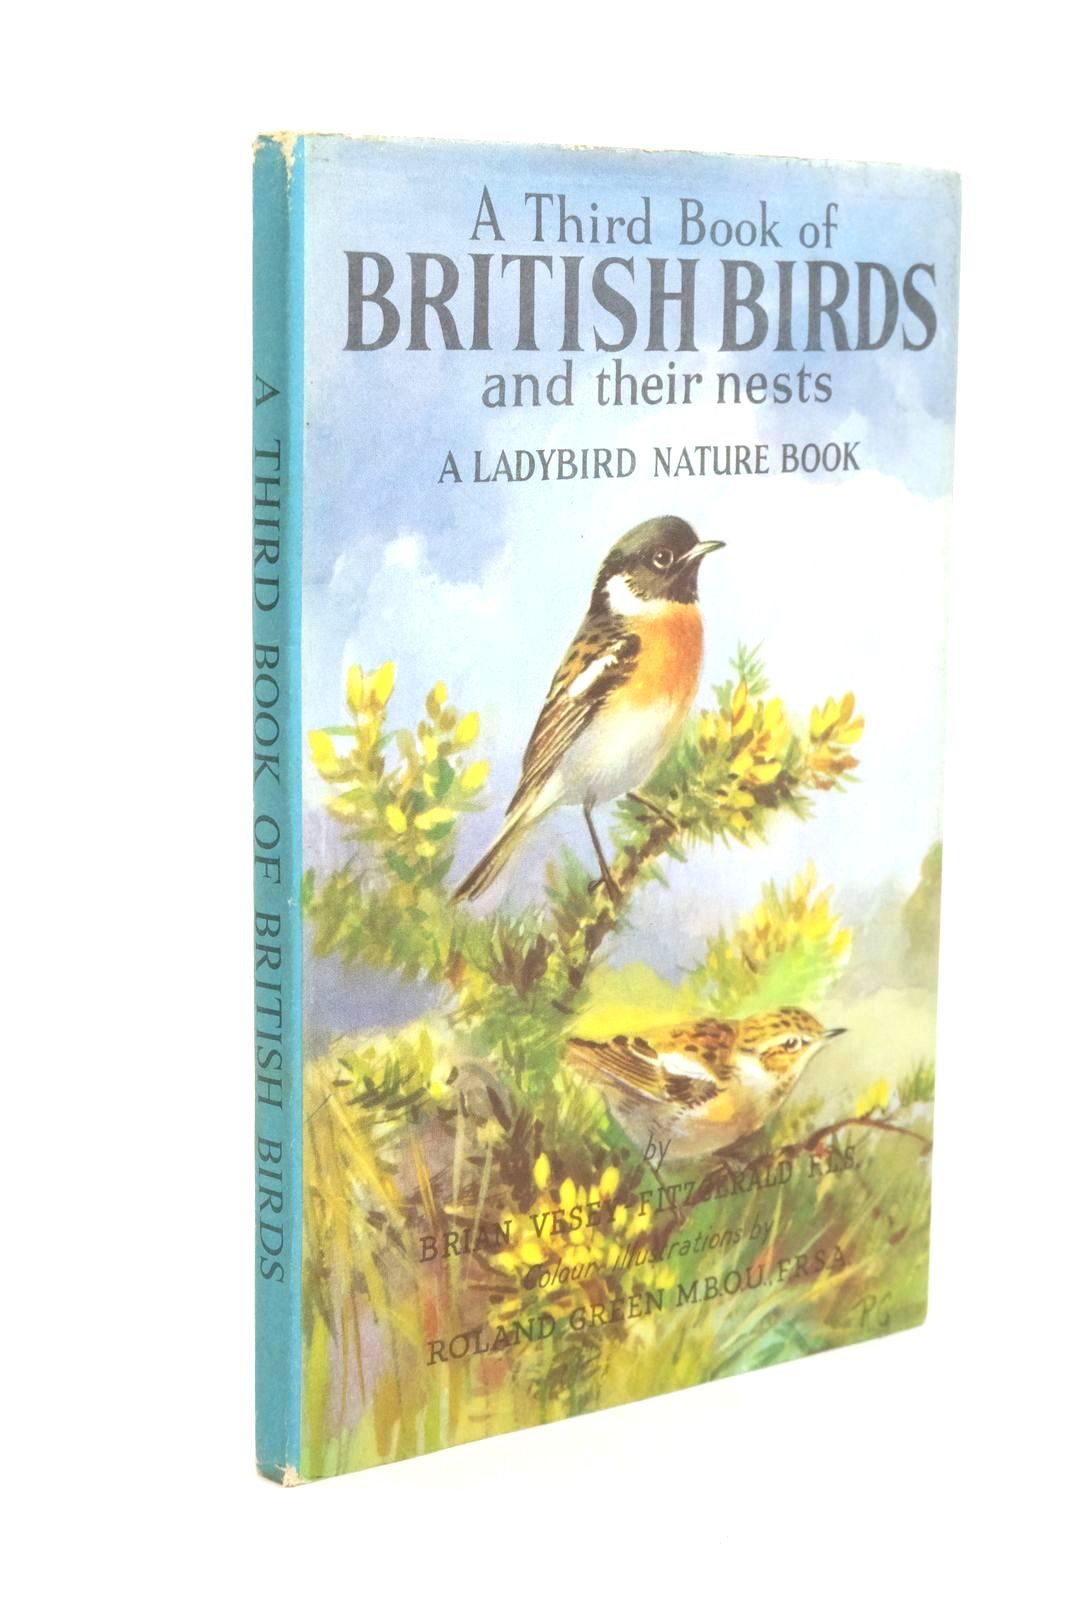 Photo of A THIRD BOOK OF BRITISH BIRDS AND THEIR NESTS written by Vesey-Fitzgerald, Brian illustrated by Green, Roland published by Wills &amp; Hepworth Ltd. (STOCK CODE: 1322143)  for sale by Stella & Rose's Books